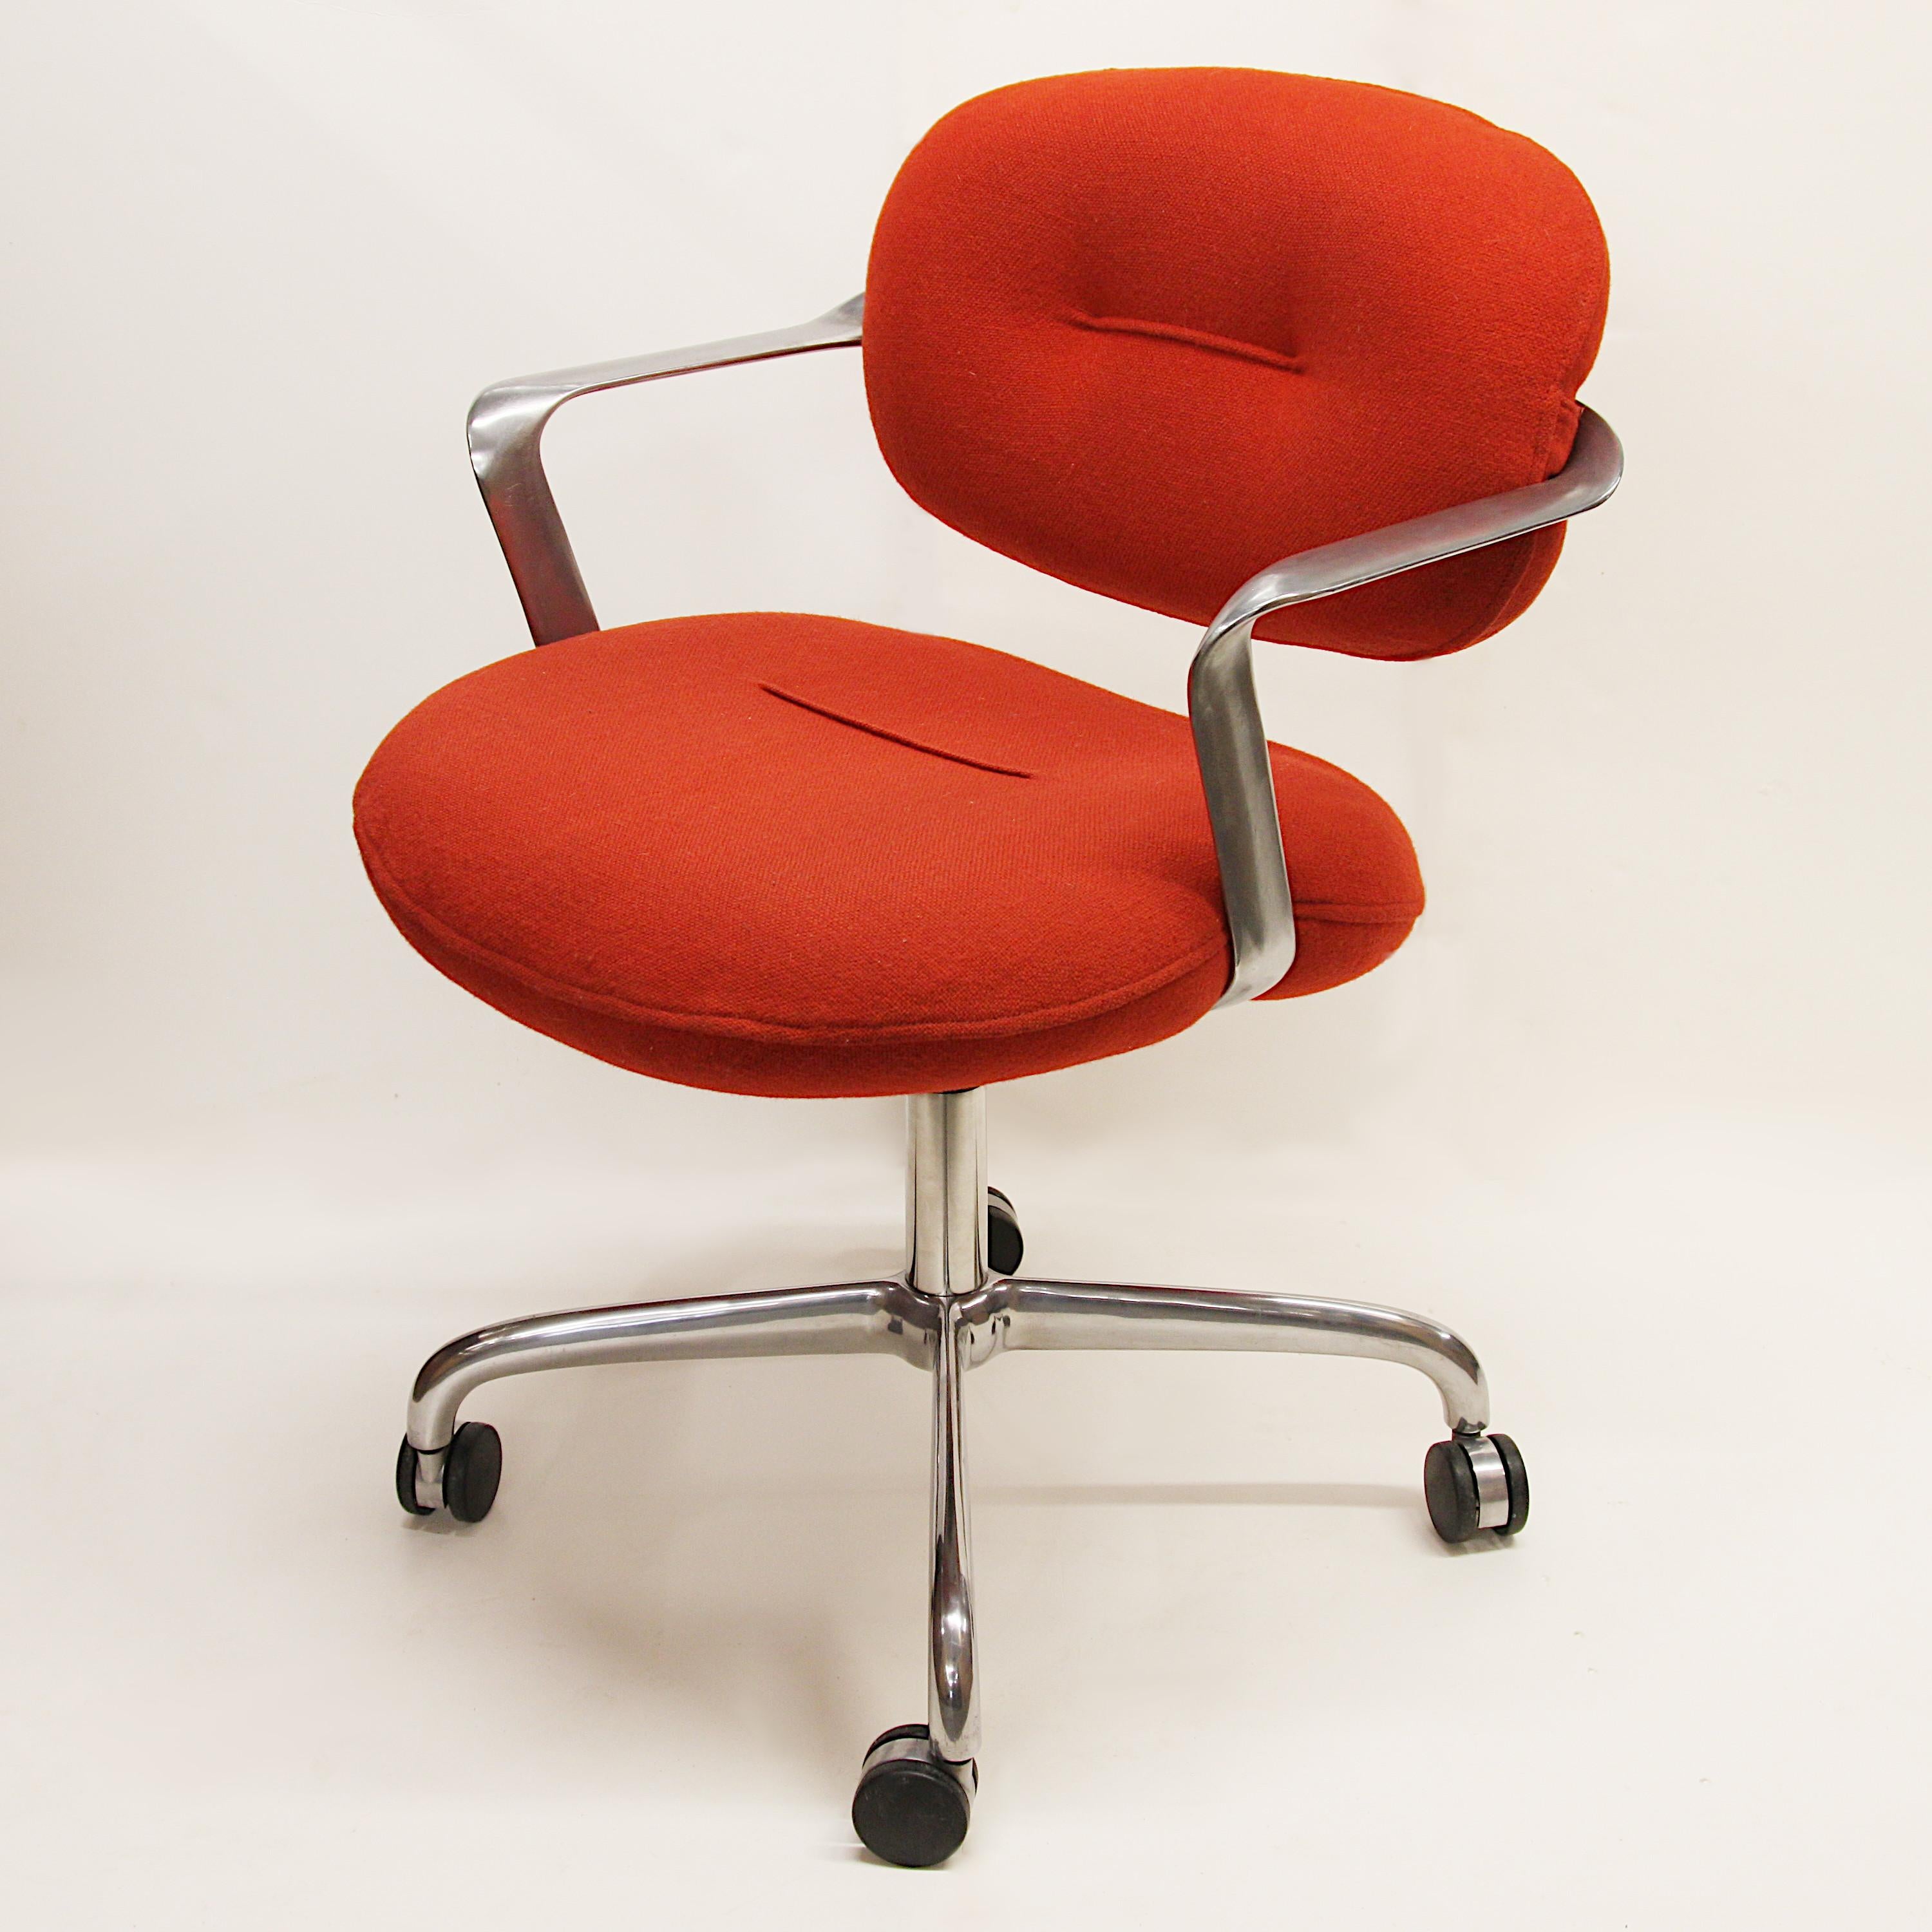 Arguably one of the most elegant desk chair designs from the mid-century era, this Morrison/Hannah design for Knoll Studios is utilitarian sculpture at its best. Chair features a curvaceous, cast-aluminum frame, red/orange tufted cushions, and